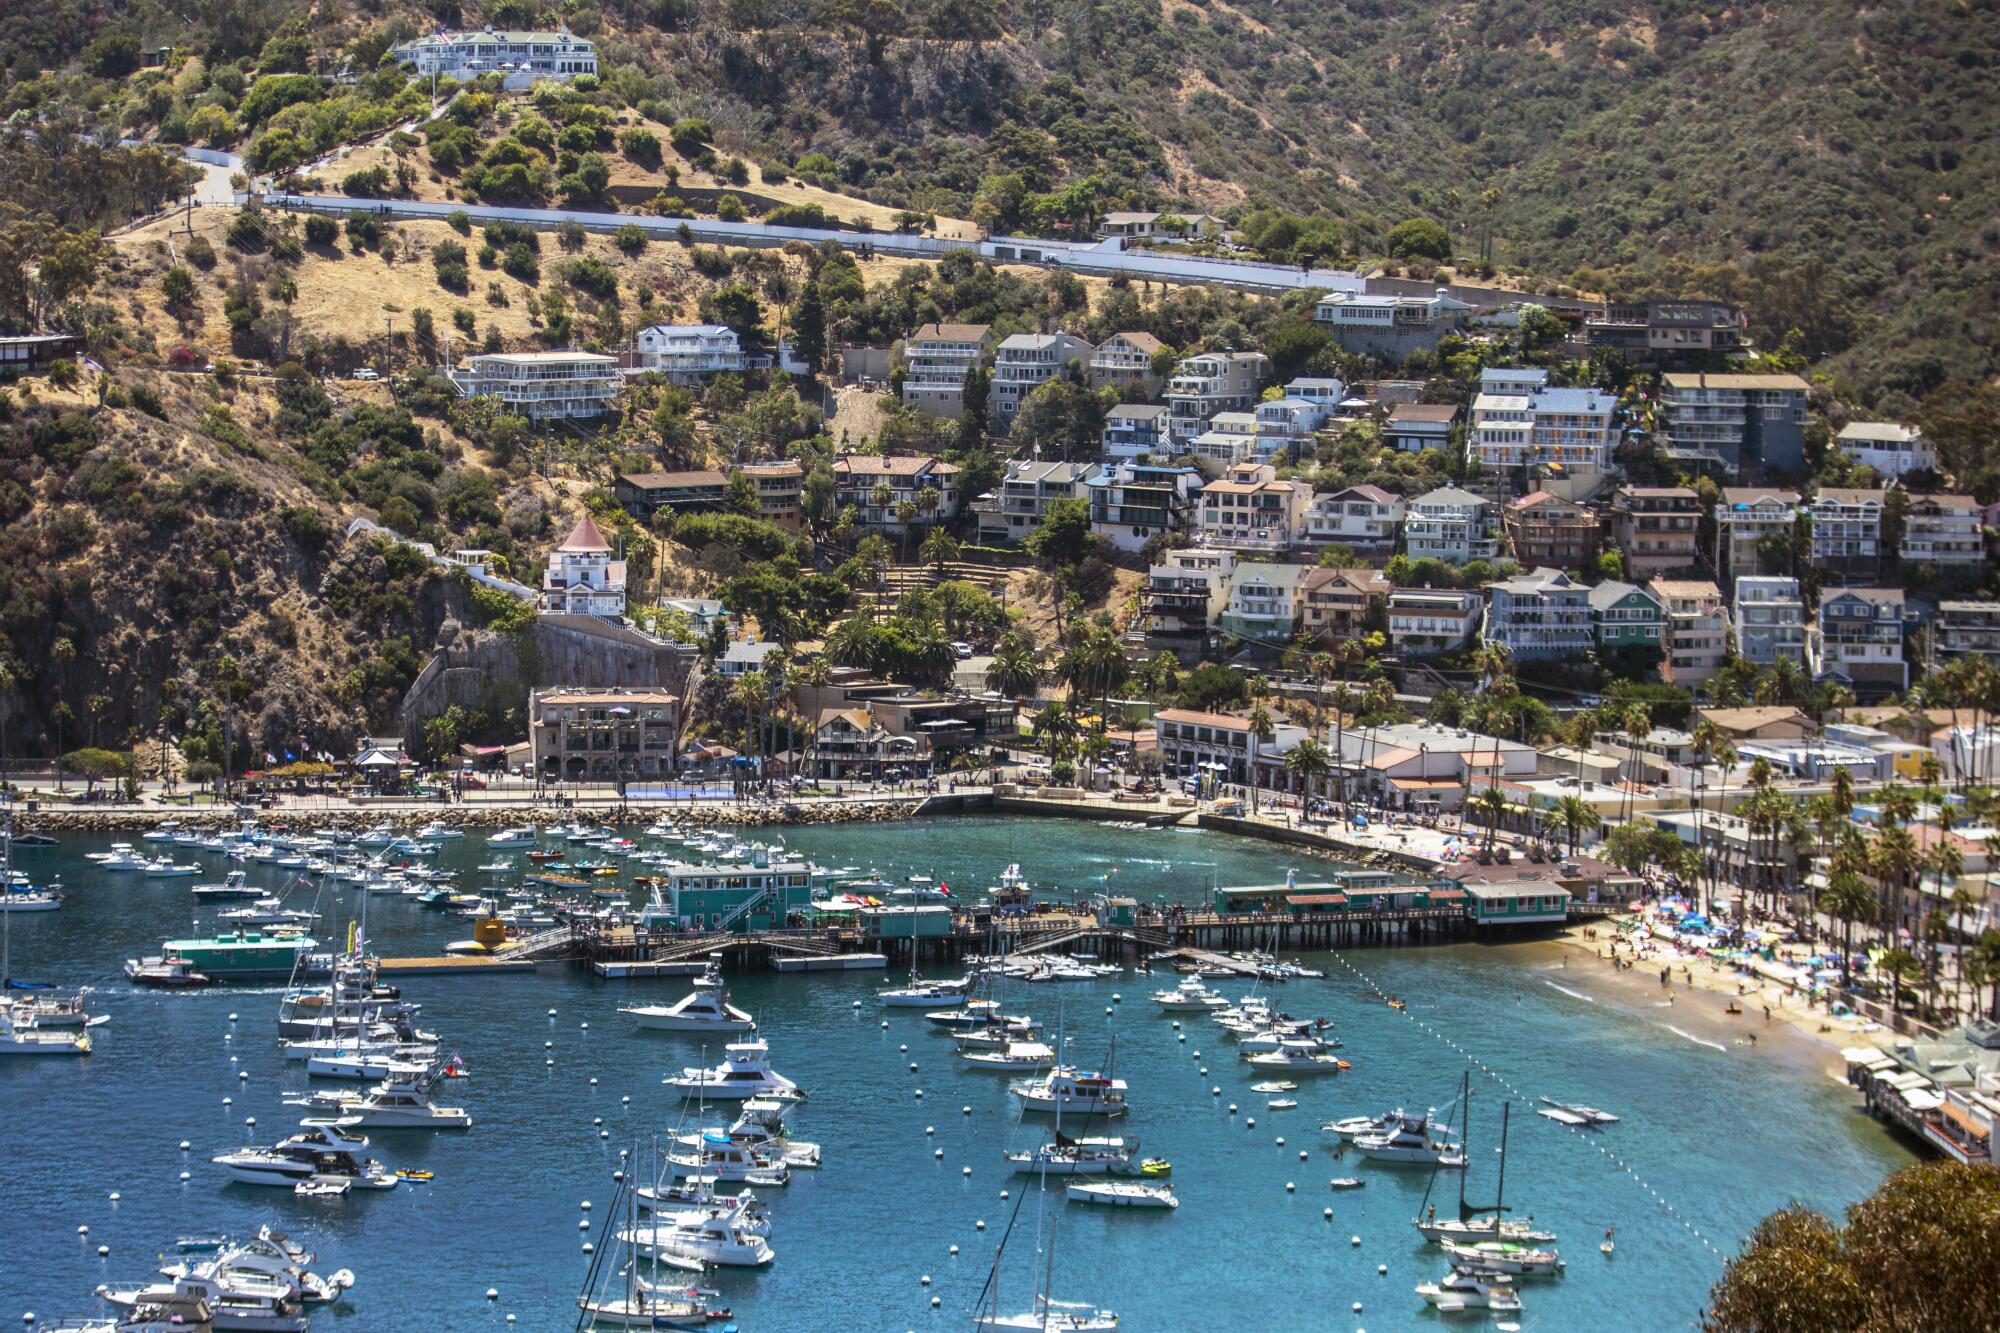 An aerial view of the harbor and hillside of Avalon, Catalina Island 